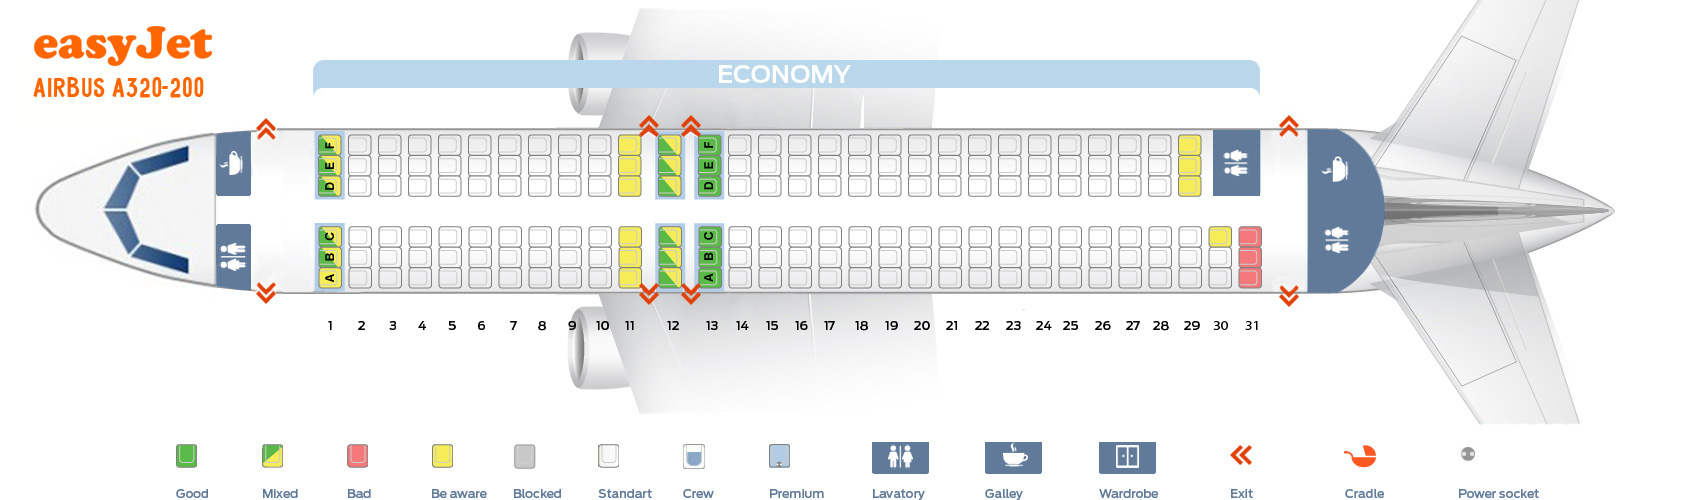 Seat map Airbus A320 Easyjet. Best seats in the plane